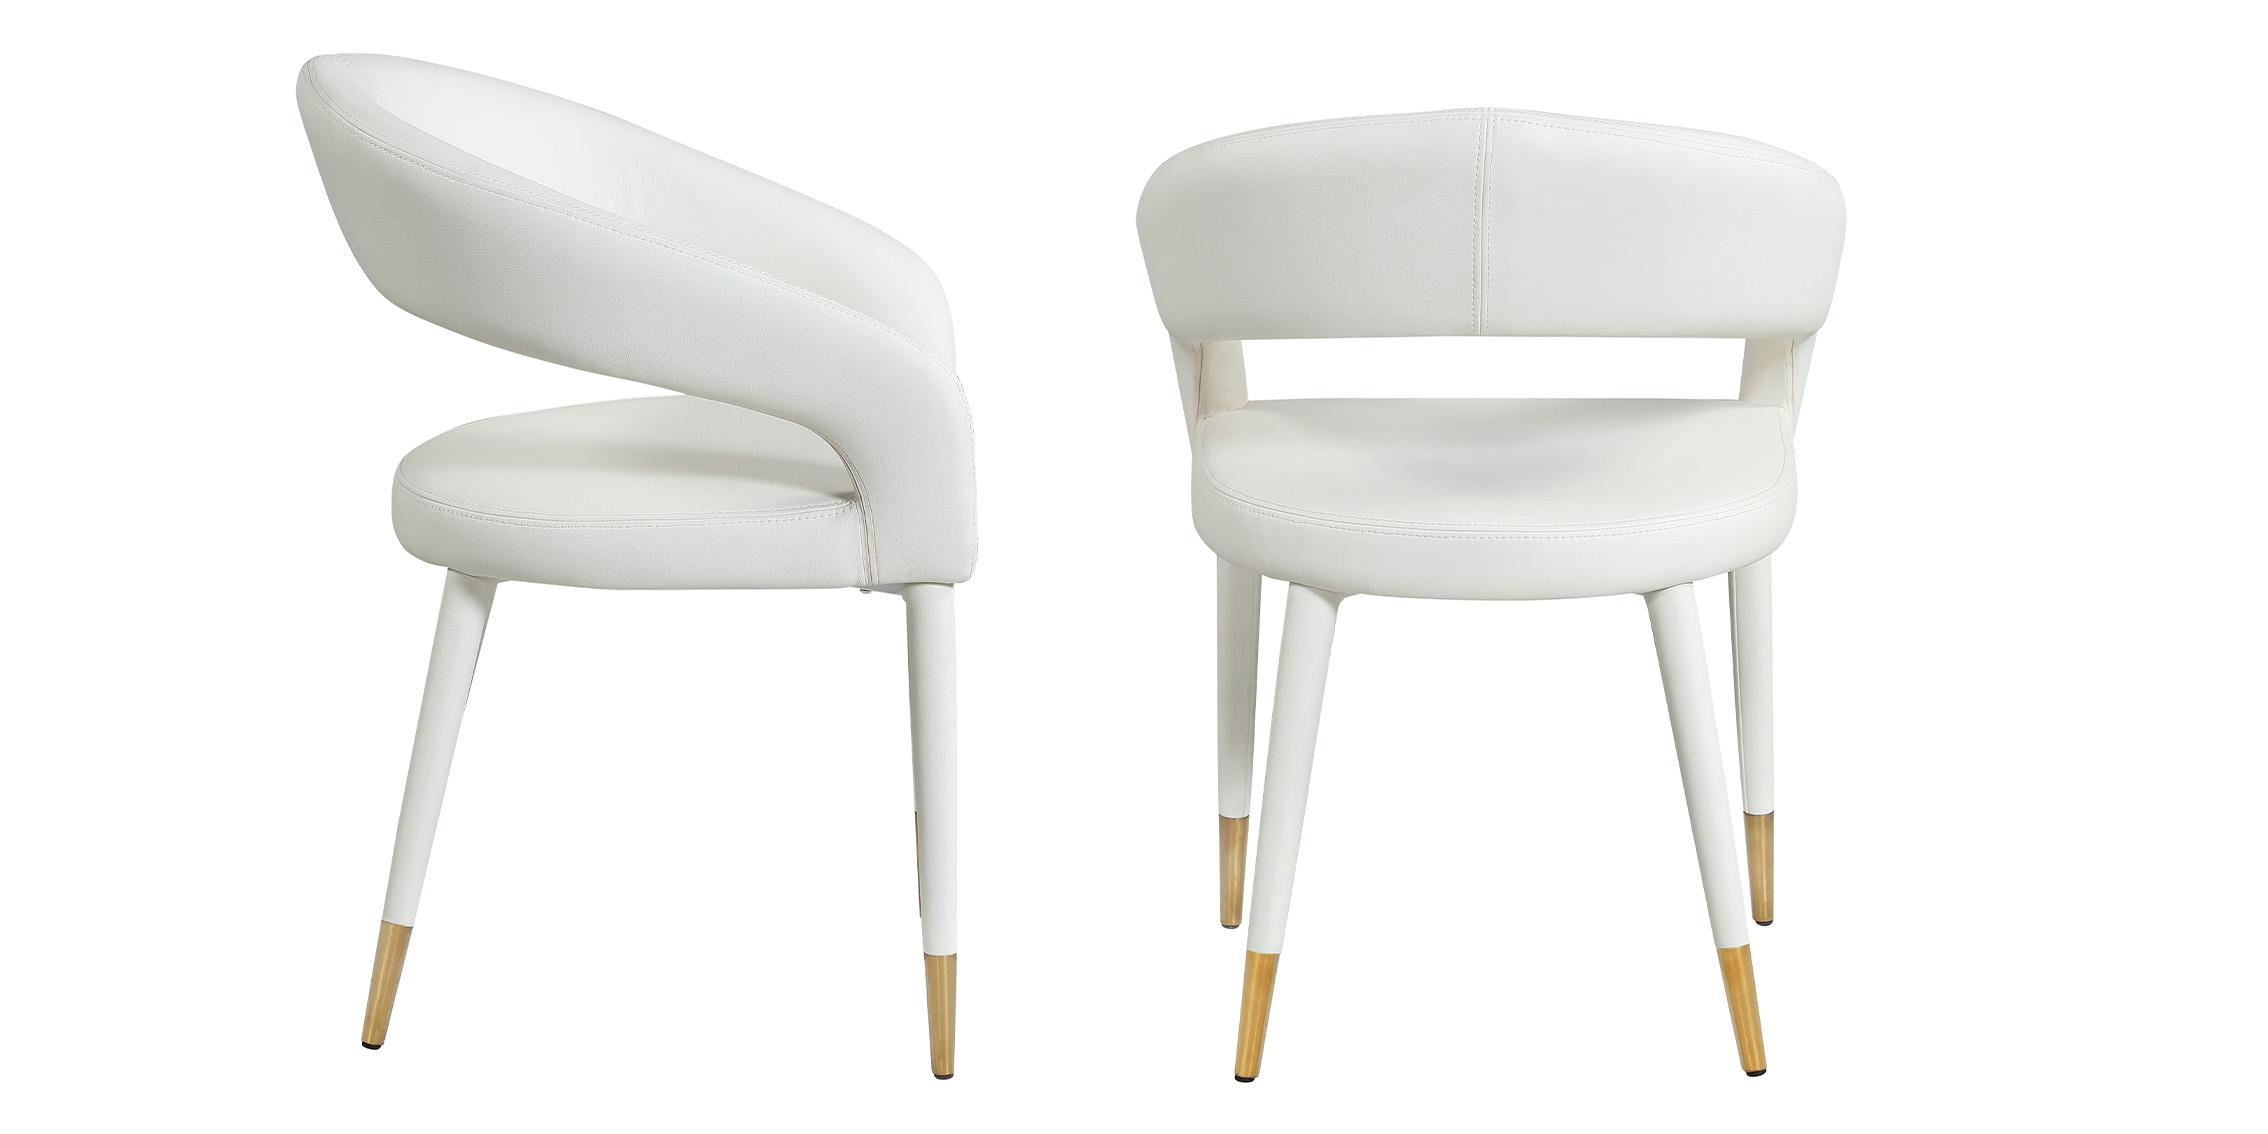 Contemporary, Modern Dining Chair Set DESTINY 538White-C 538White-C-Set-2 in White, Gold Faux Leather